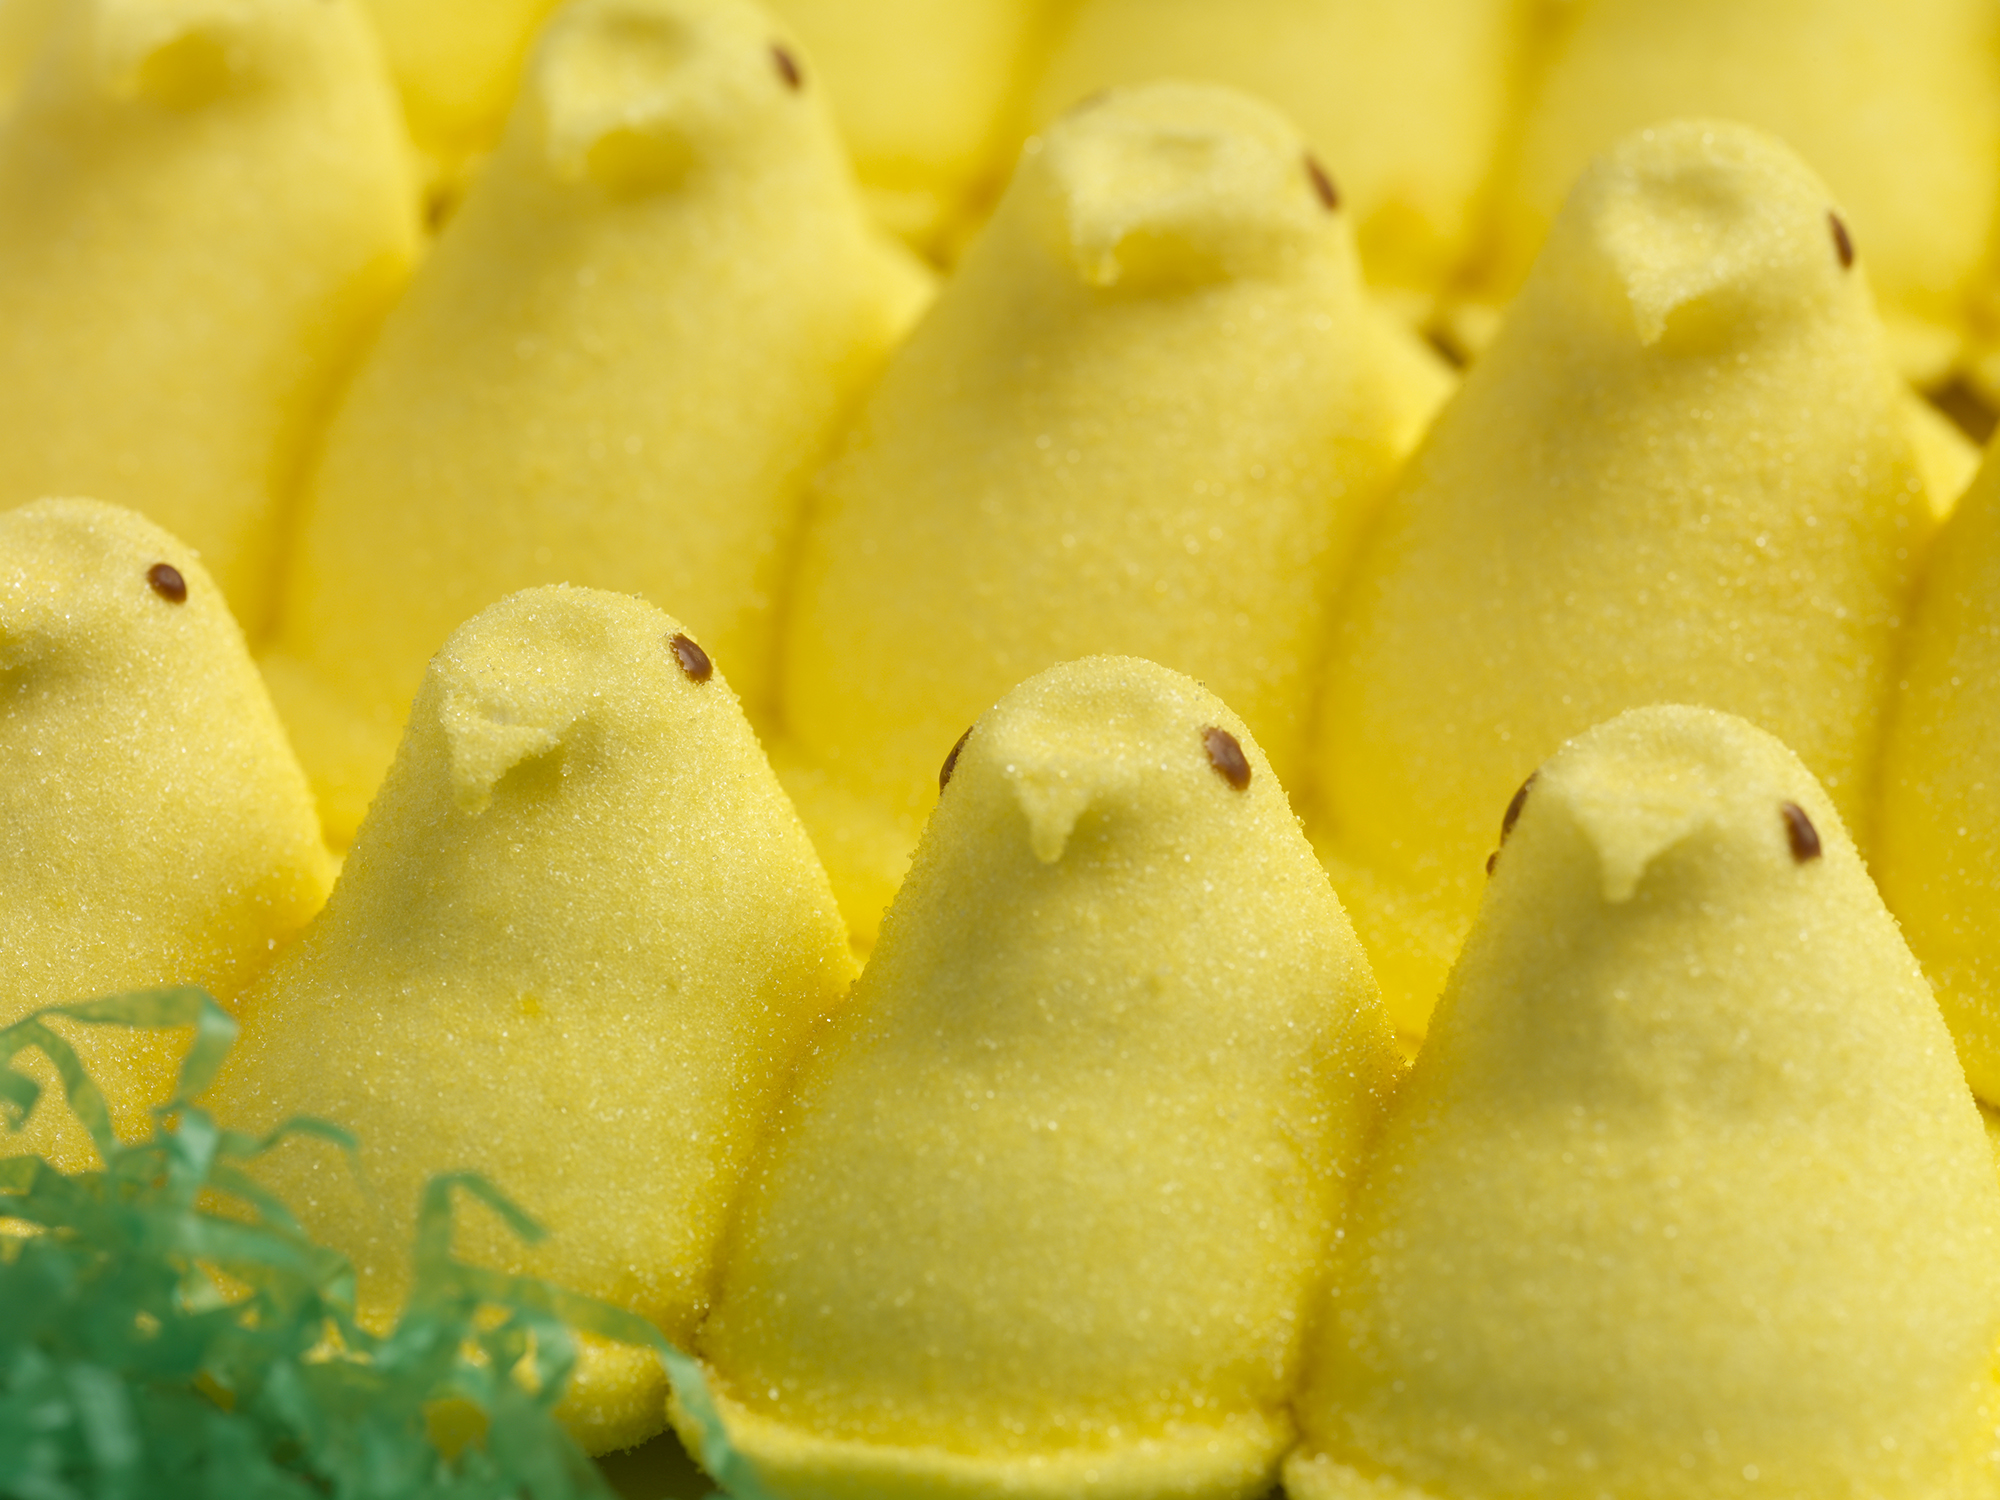 Yellow Marshmallow Chicks in Rows